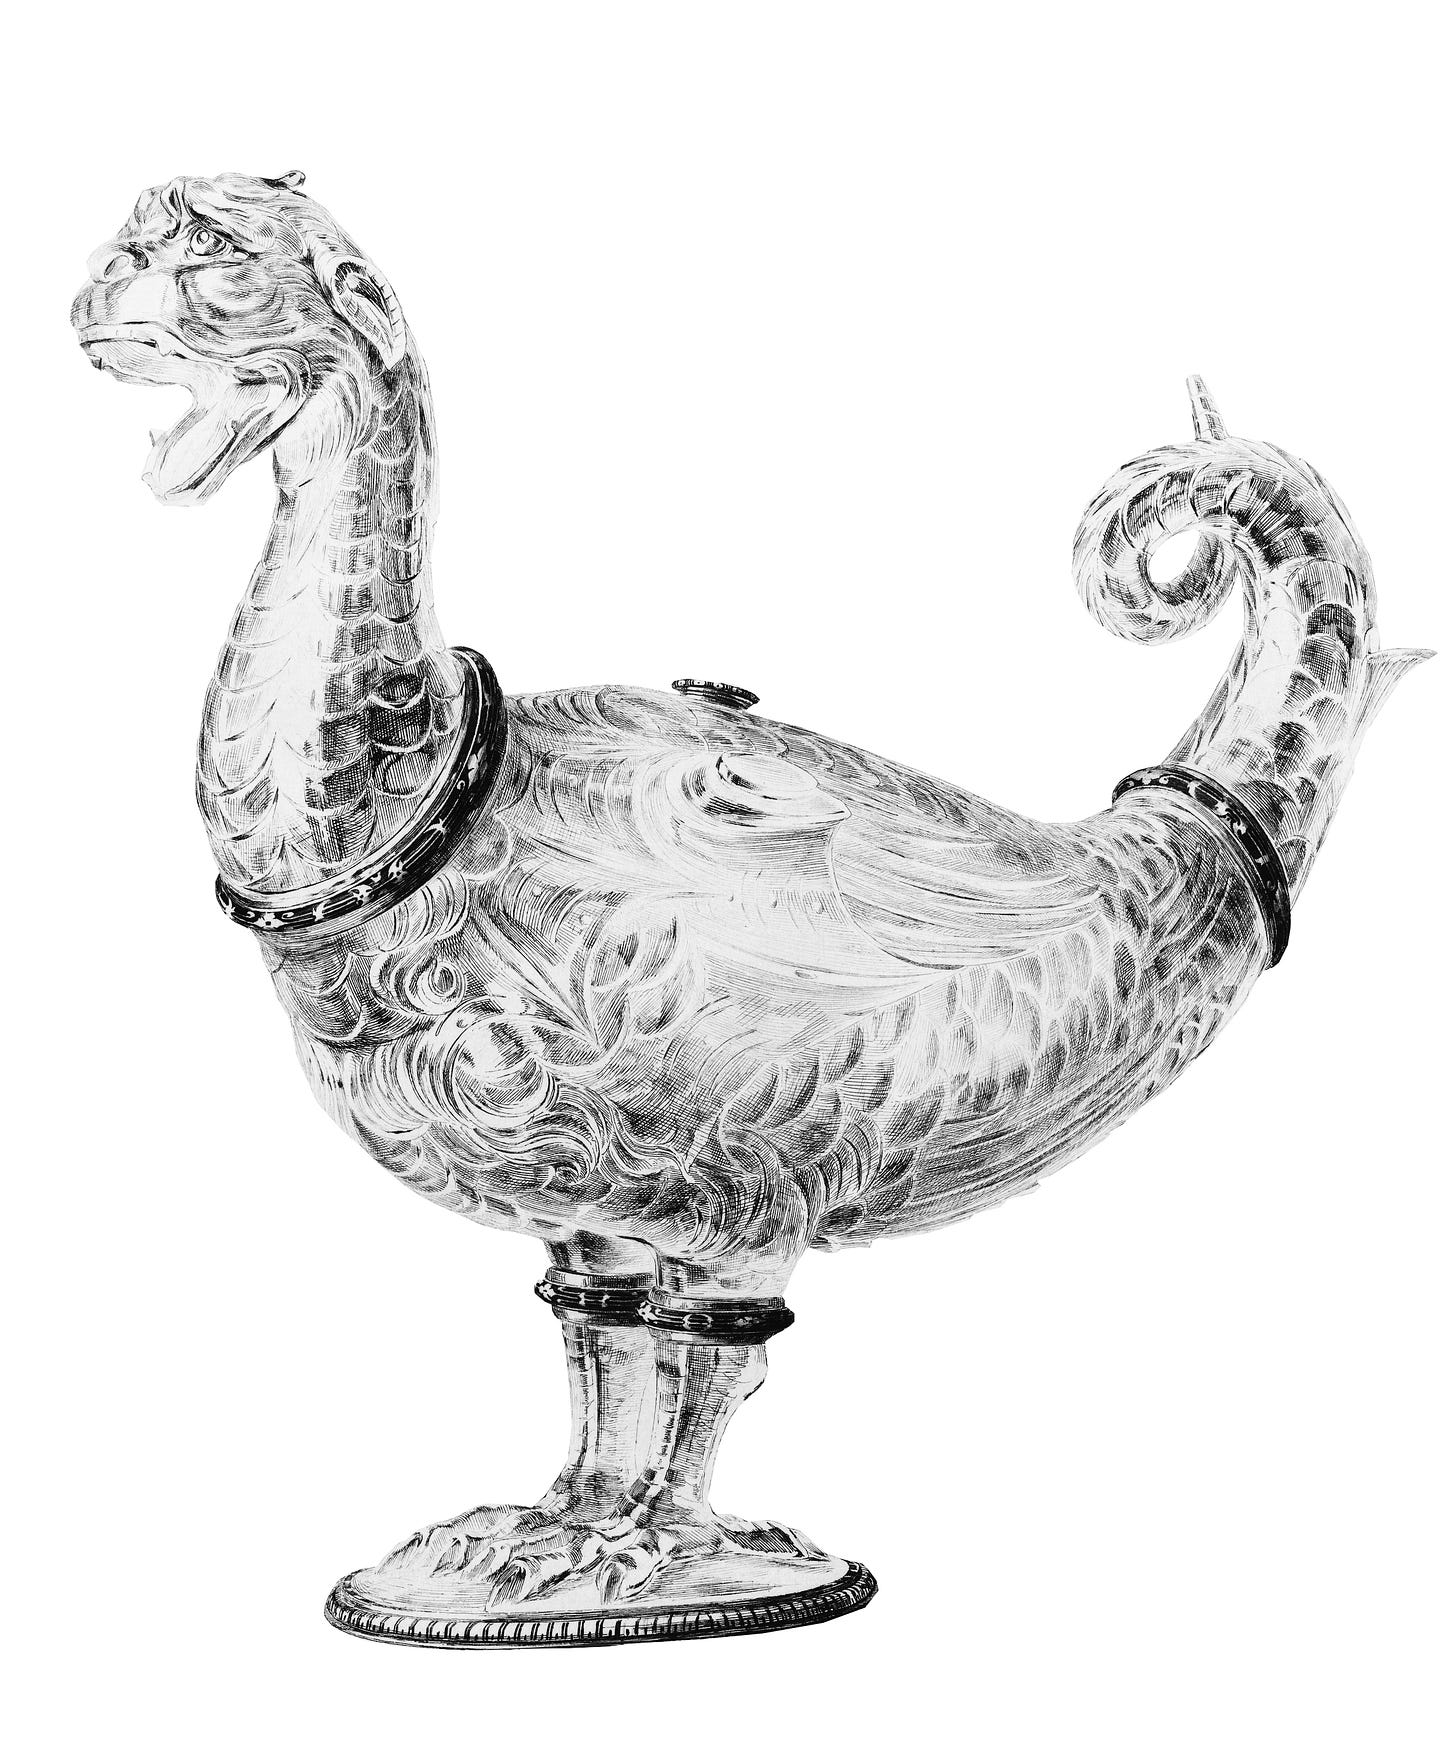 Black and white illustration of a crystal ewer shaped like a dog headed bird.